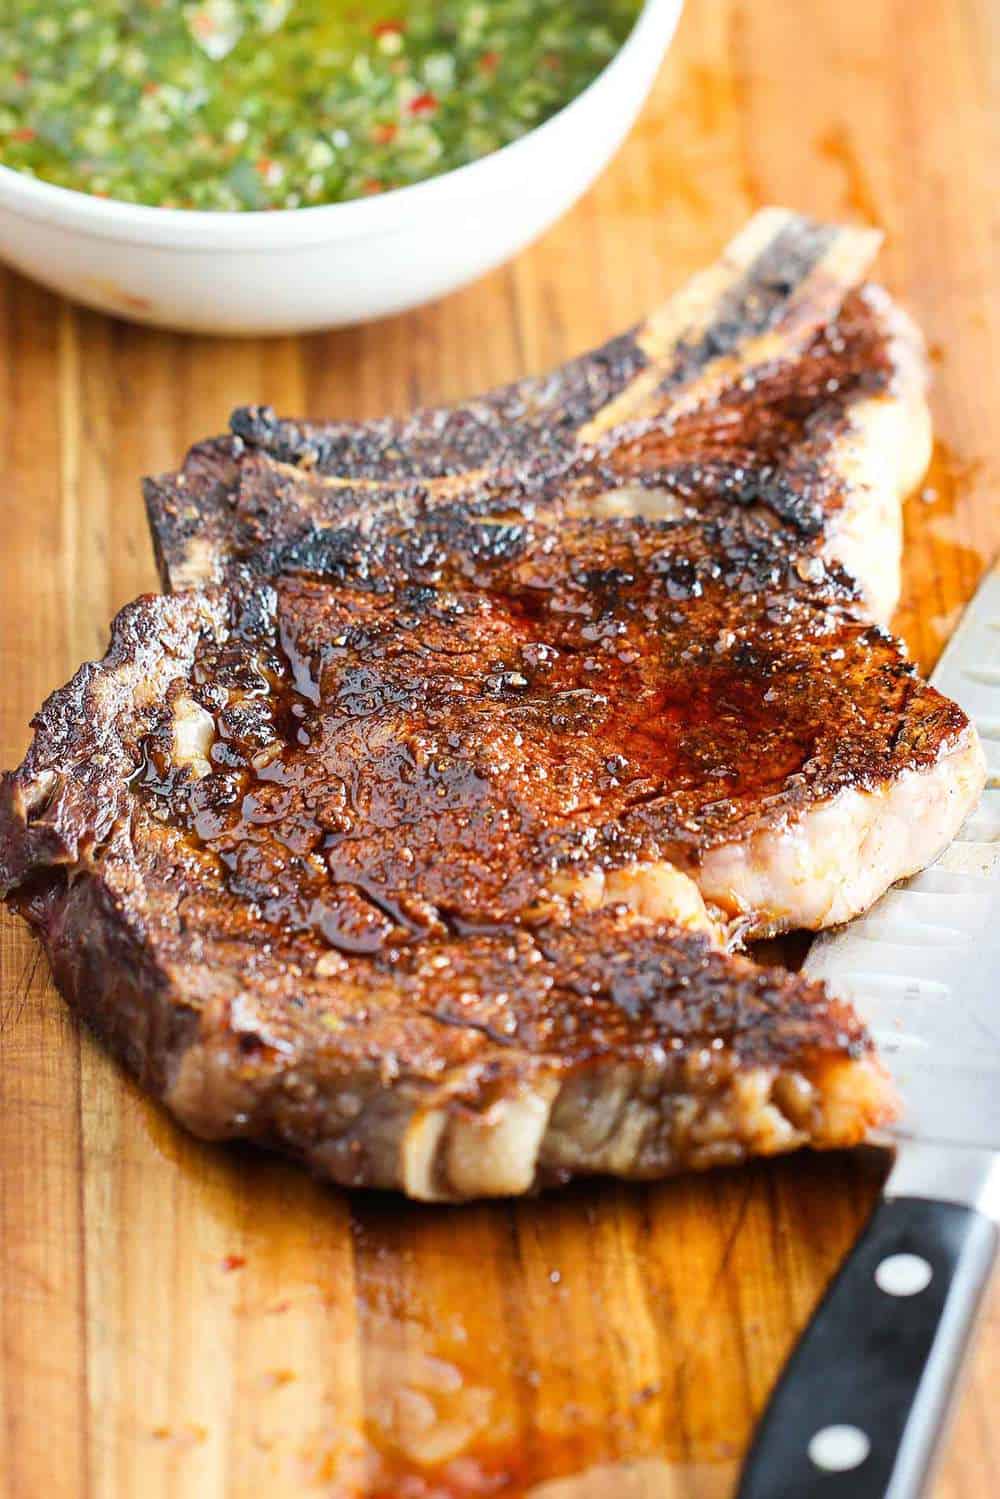 the grilled ribeye steak is resting on a cutting board